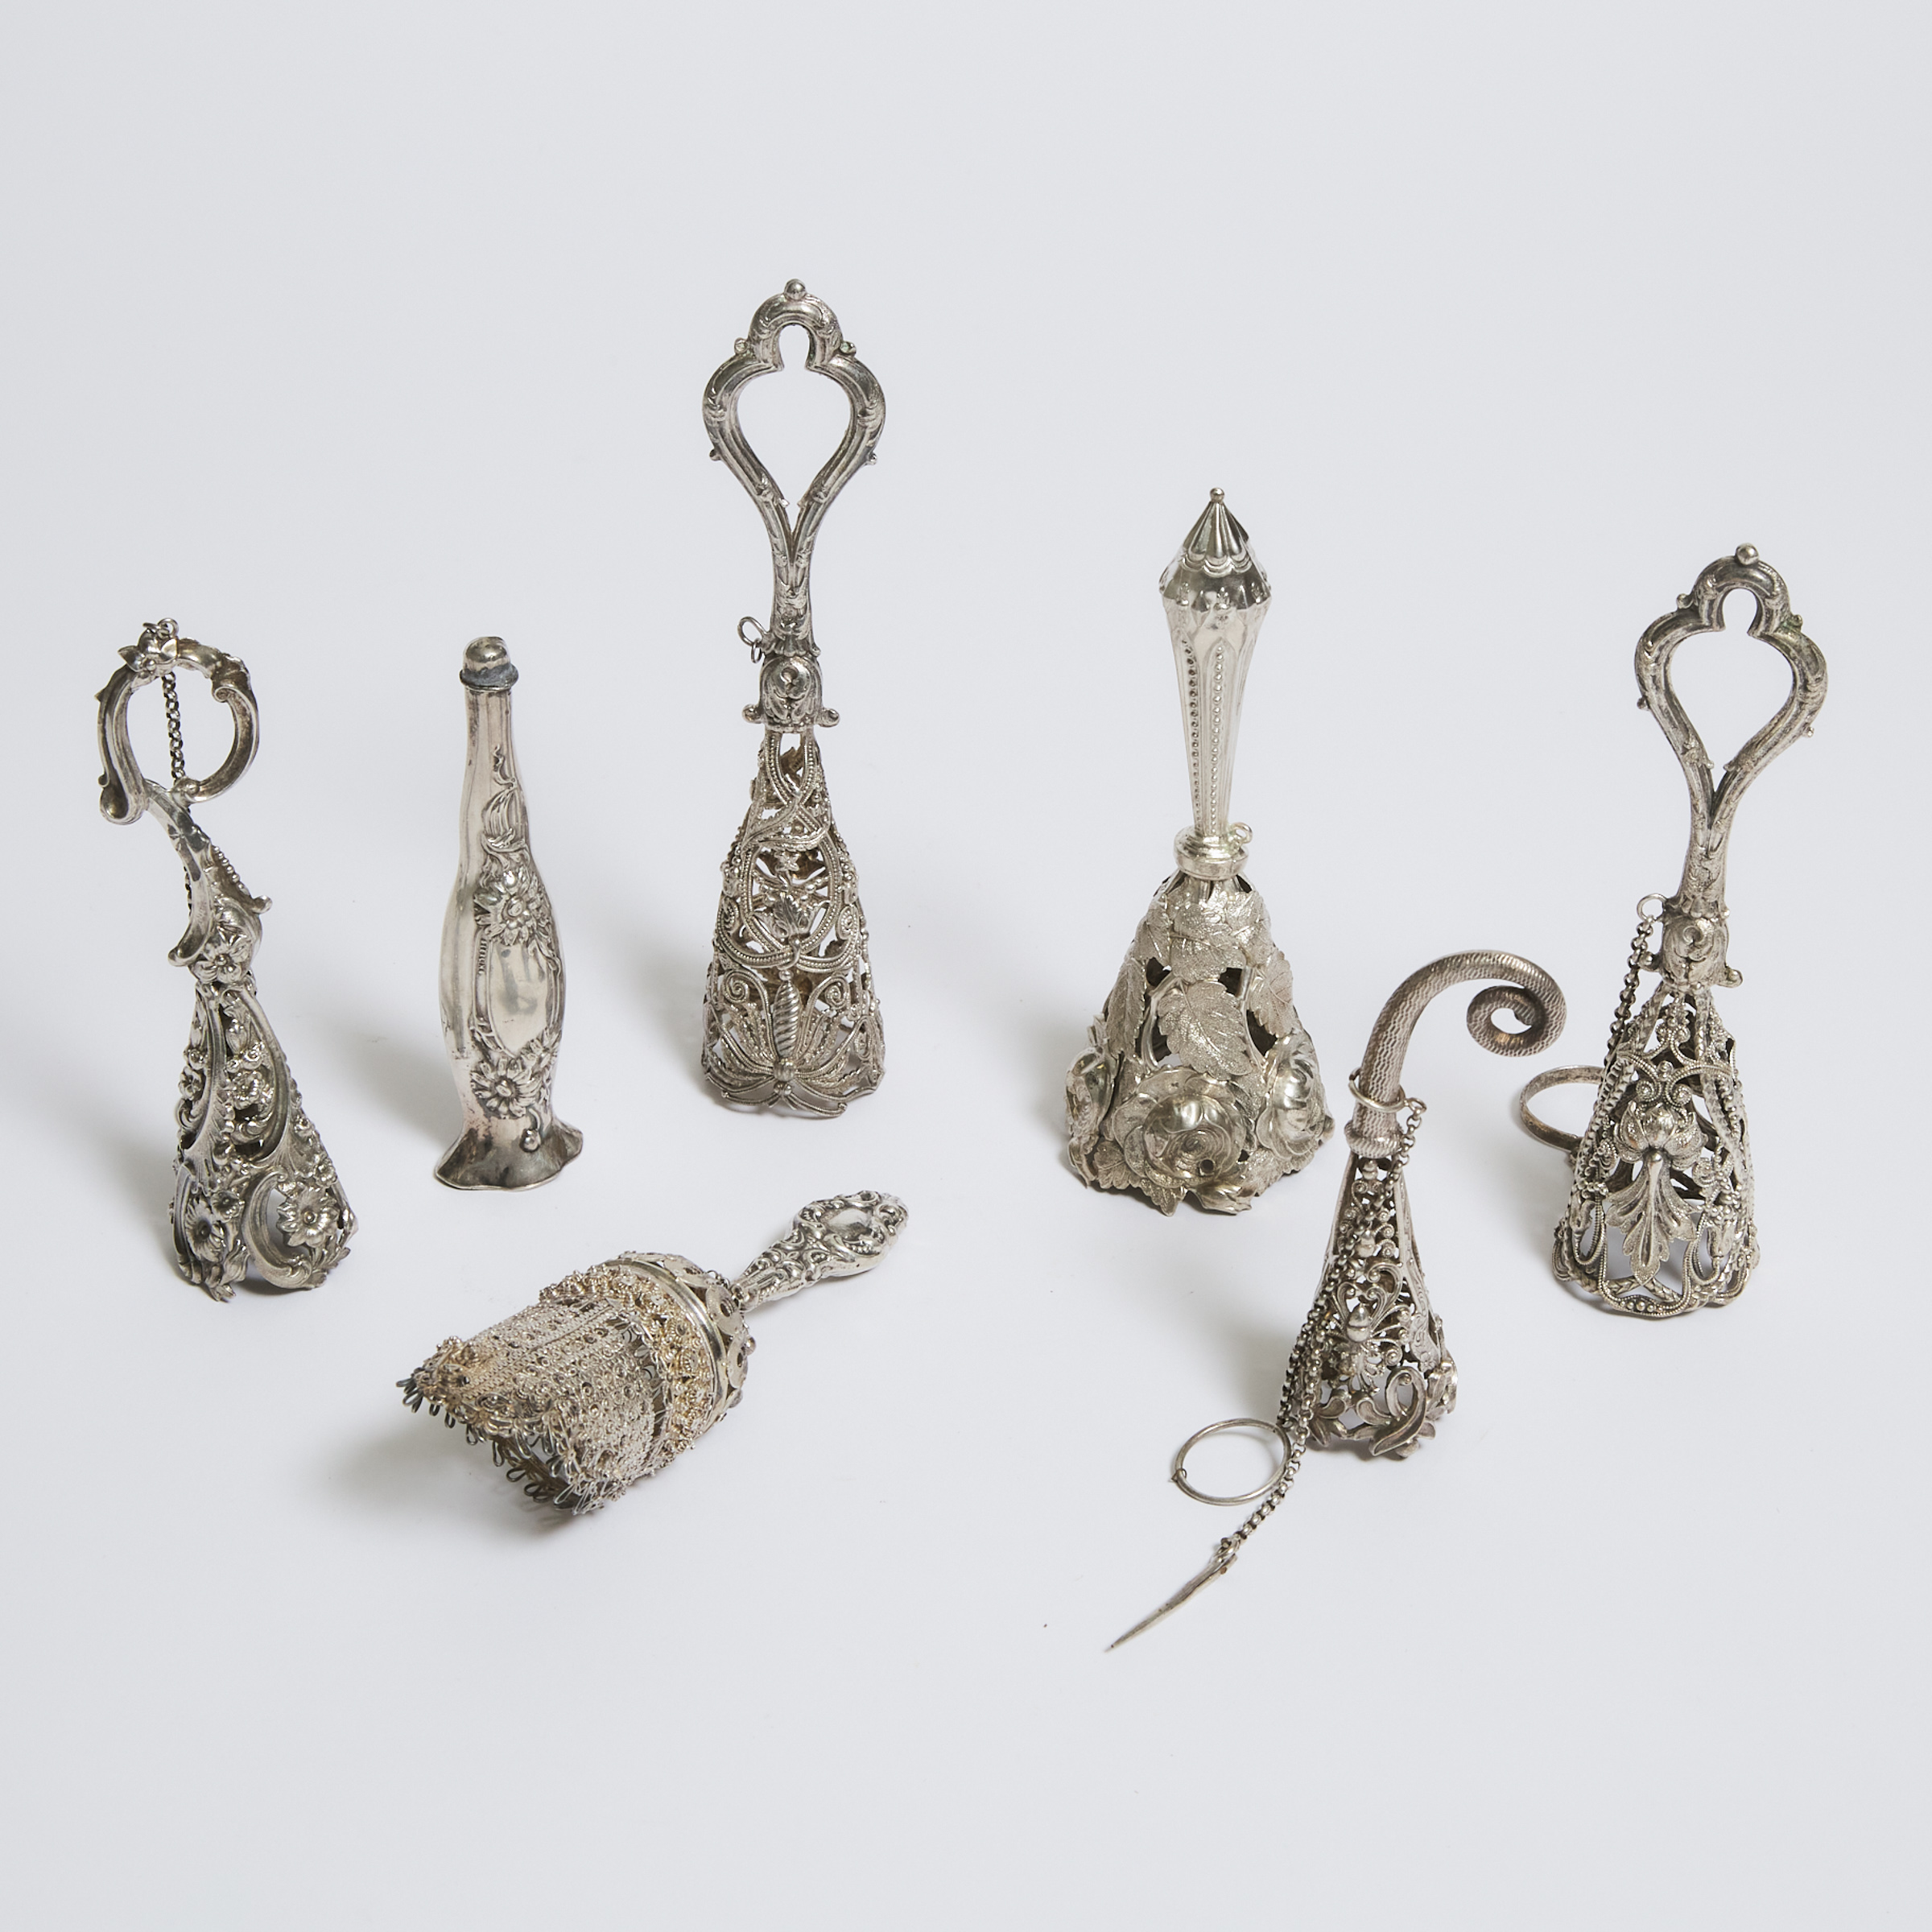 Seven Victorian Silver or Silvered Metal Posy Holders, 19th century